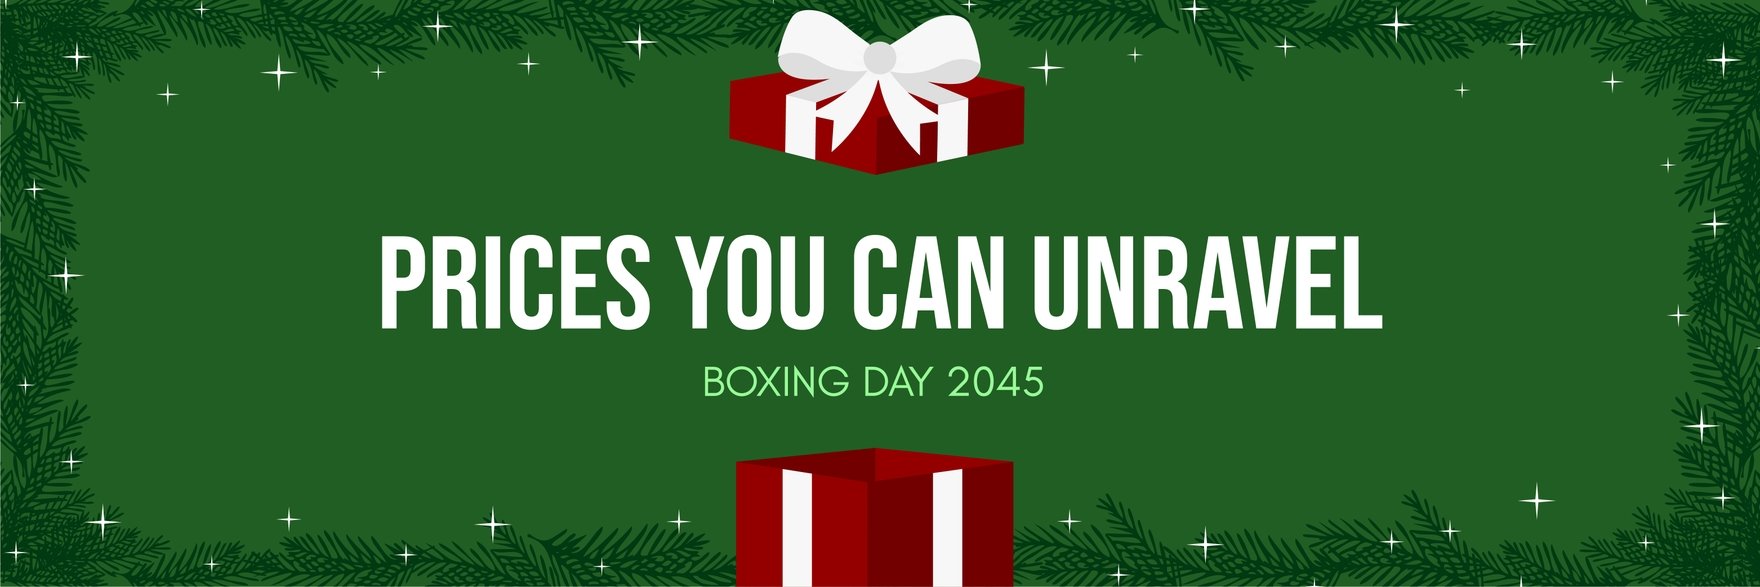 Boxing Day Twitter Banner in Illustrator, PSD, EPS, SVG, PNG, JPEG